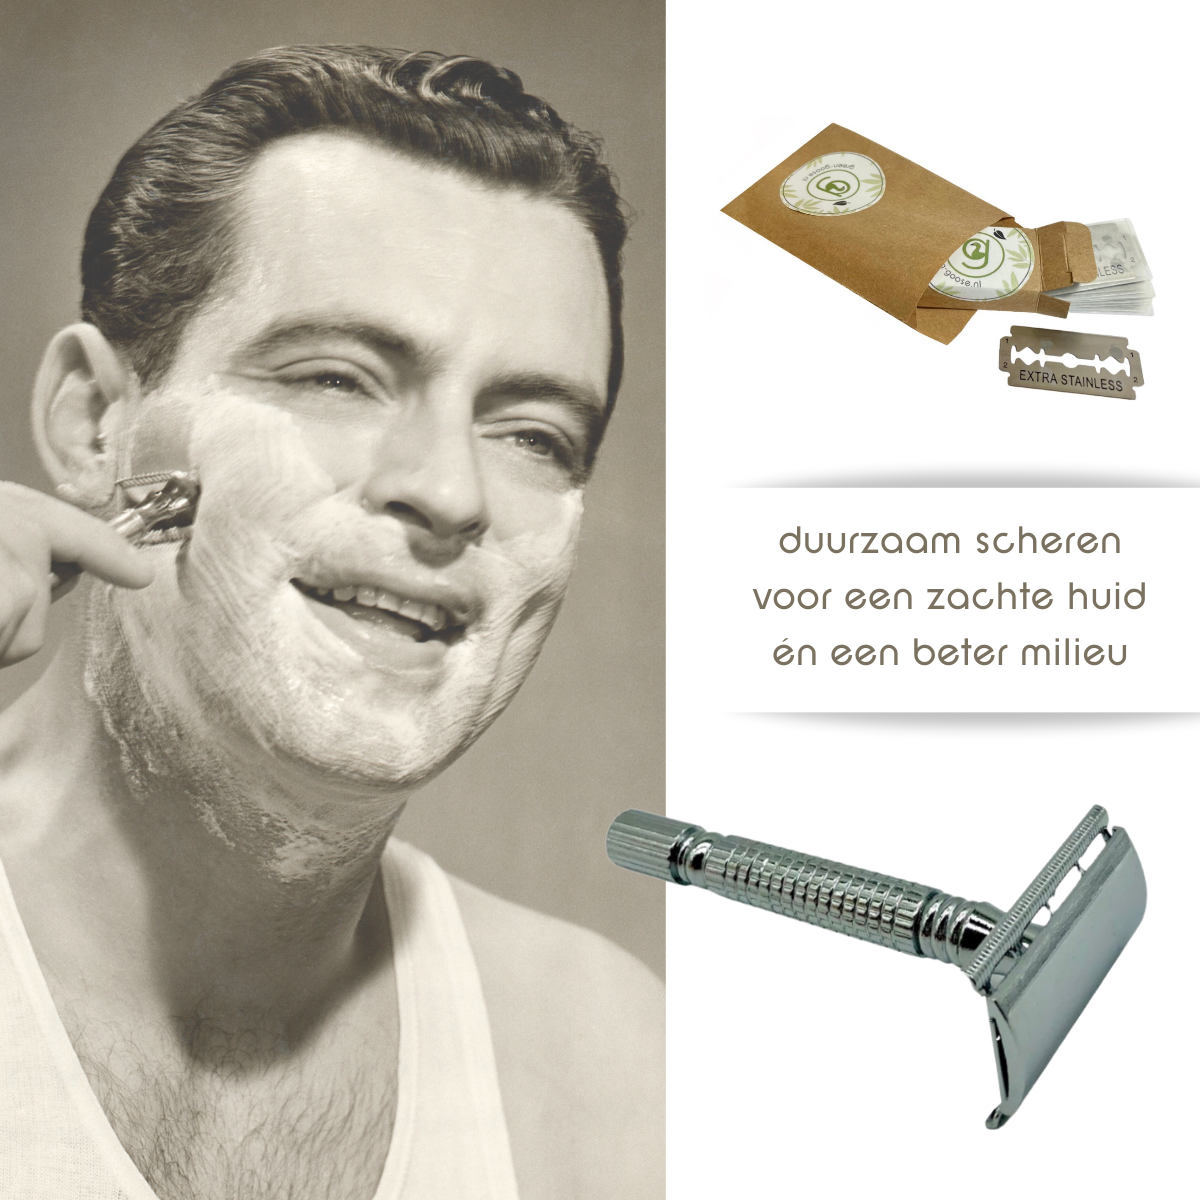 Carebox | The Shaving Pack | Silver Butterfly clasp